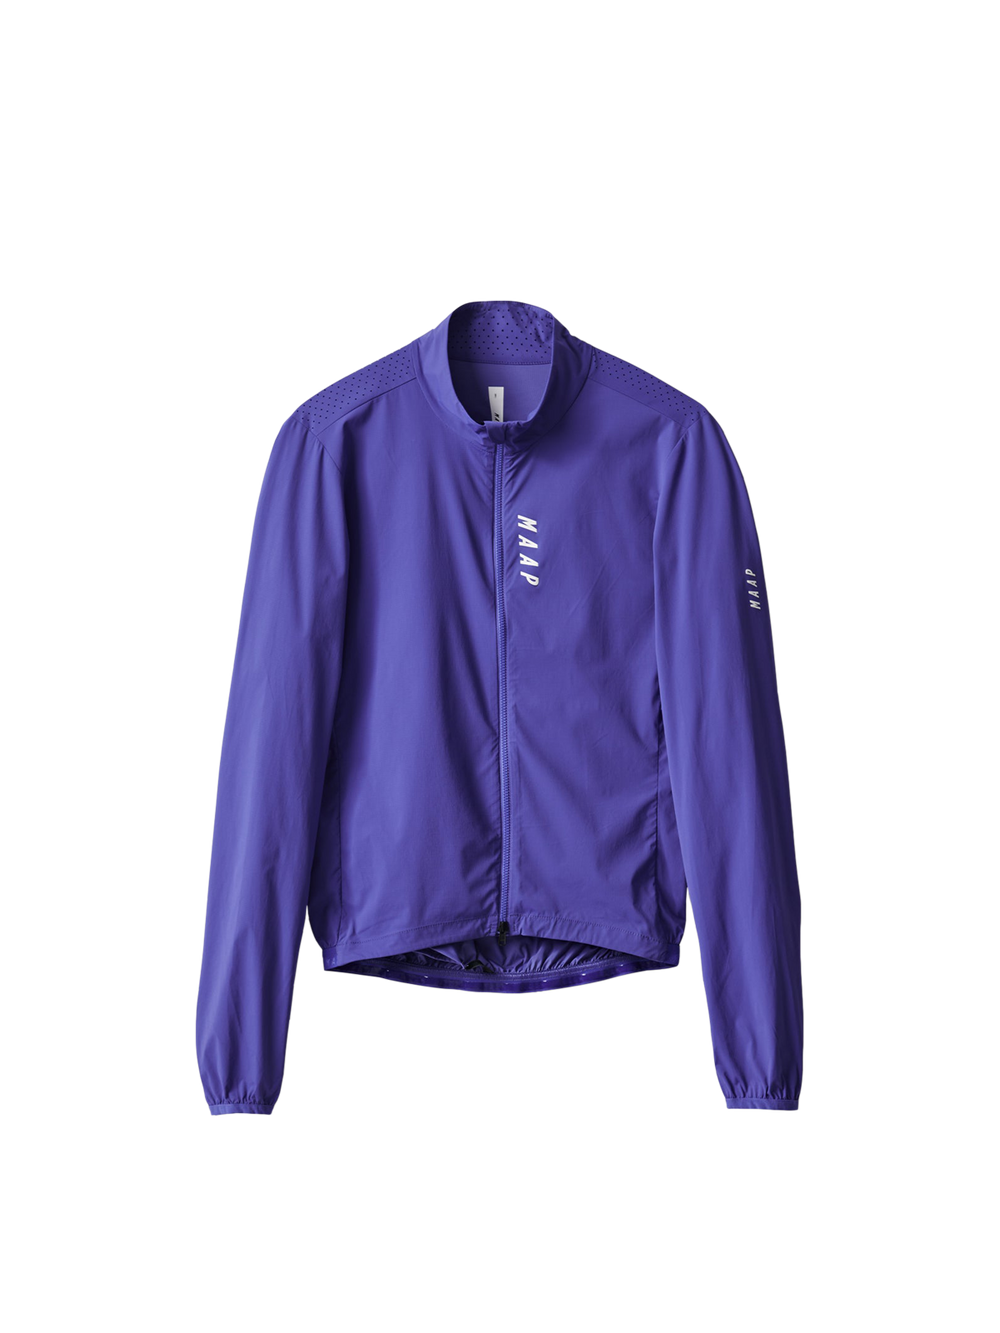 Product Image for Draft Team Jacket